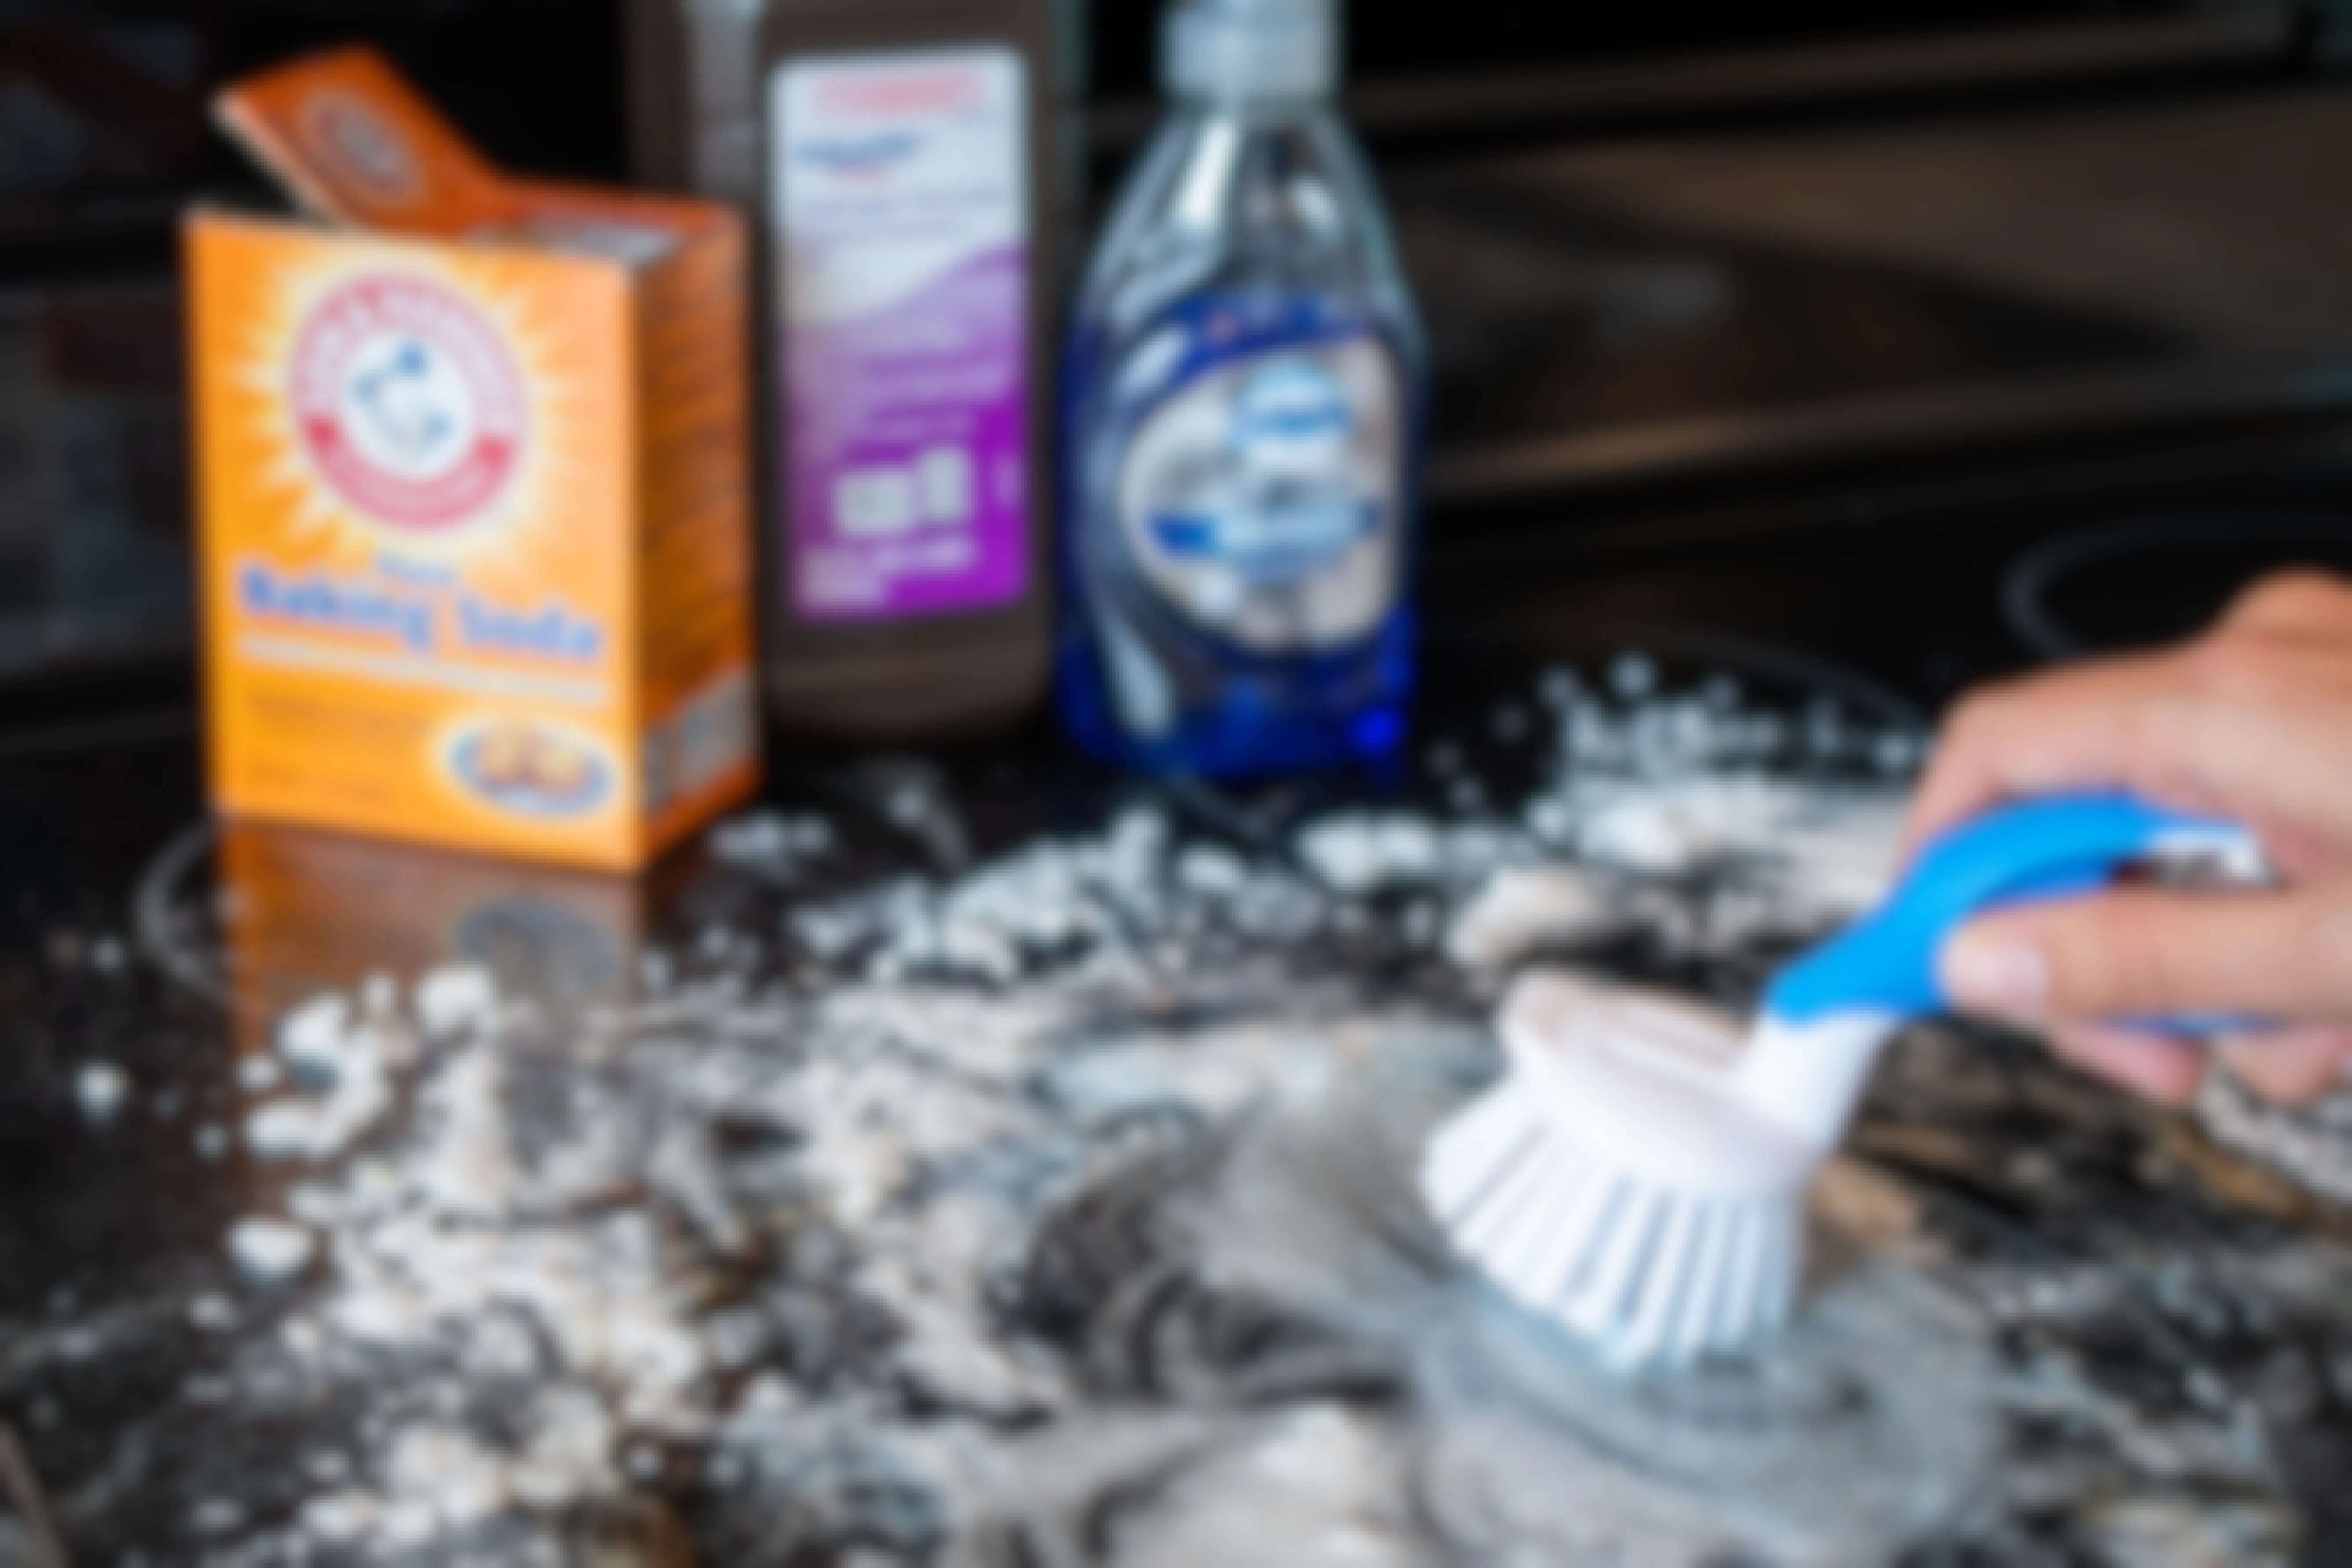 A person scrubbing a glass stove top with making soda, hydrogen peroxide, and dawn dish soap